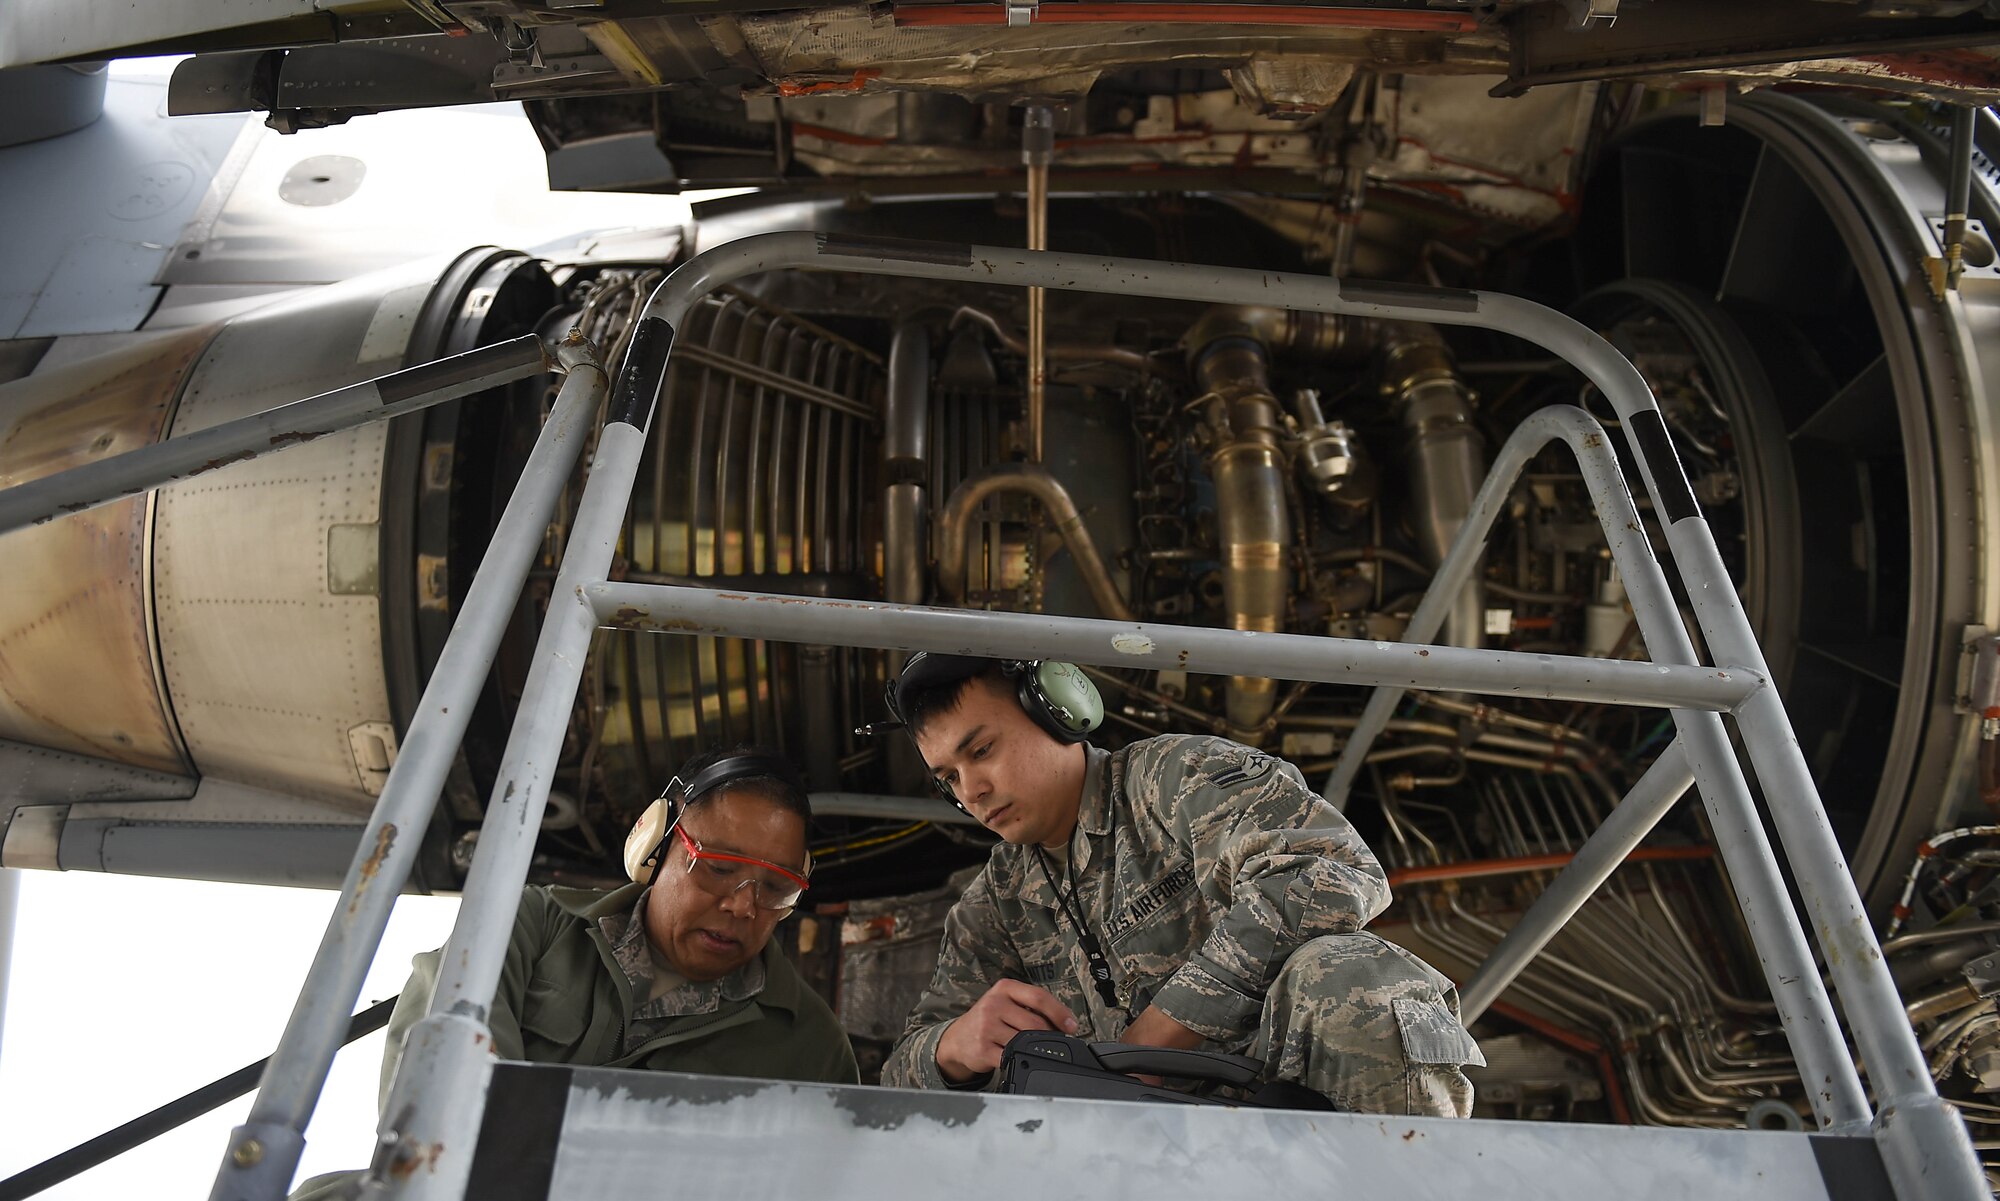 Master Sgt. Ruel Lechadores, 446th Aircraft Maintenance Squadron crew chief, and Airman 1st Class Ryan Watts, 62nd Aircraft Maintenance Squadron crew chief, communicate and work to repair an engine on a C-17 Globemaster III, April 3, 2019, on March Air Reserve Base in California.